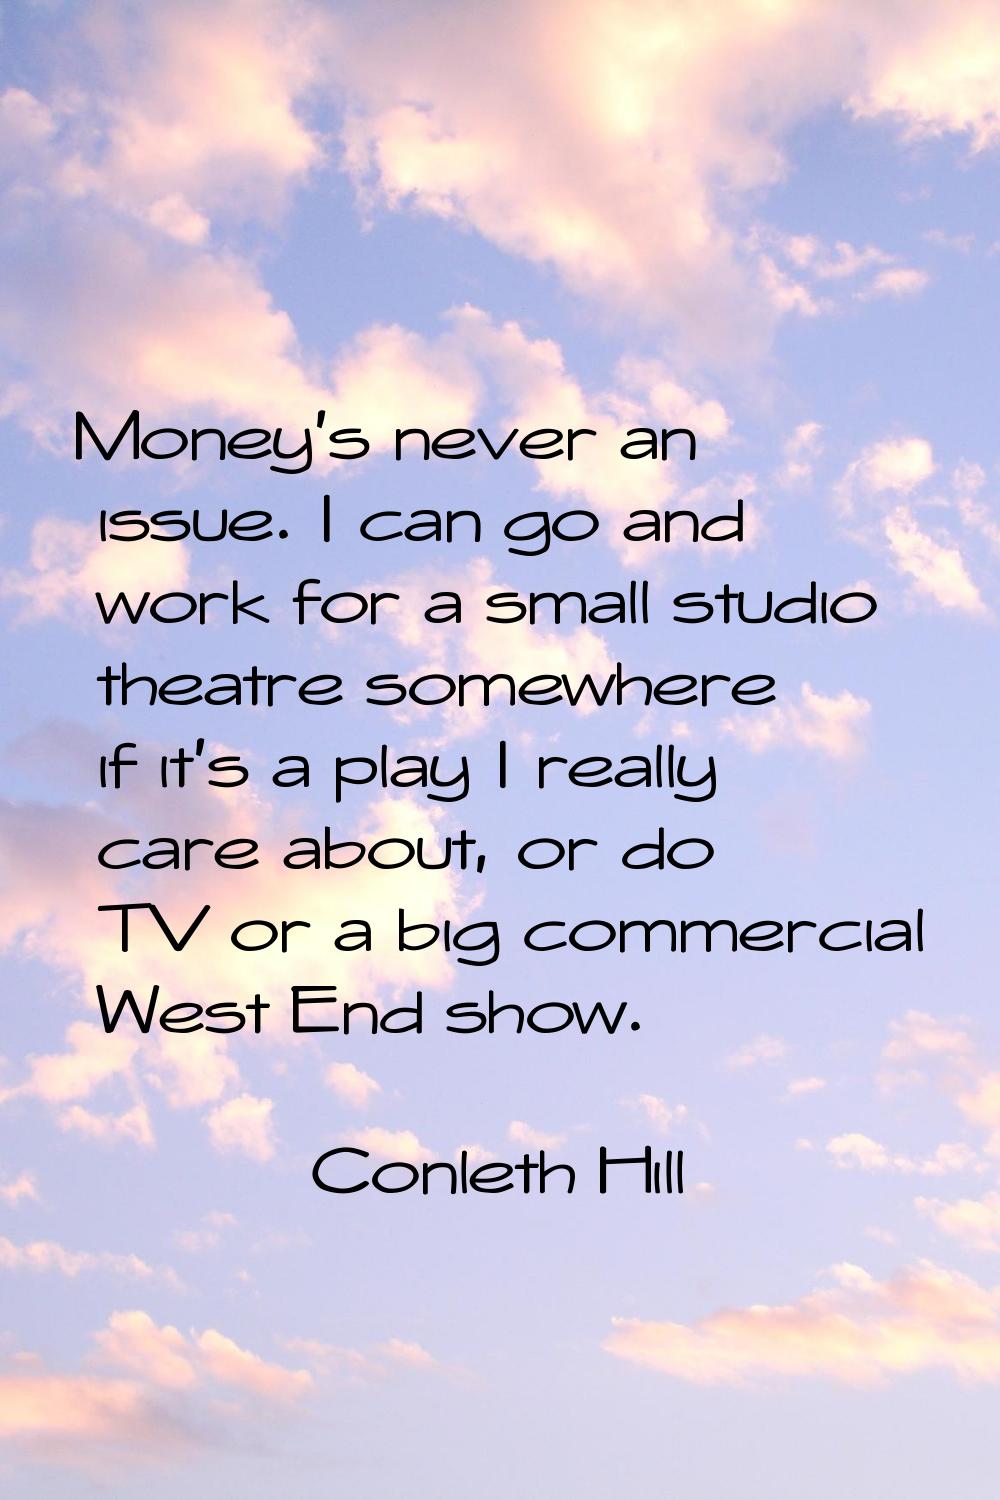 Money's never an issue. I can go and work for a small studio theatre somewhere if it's a play I rea